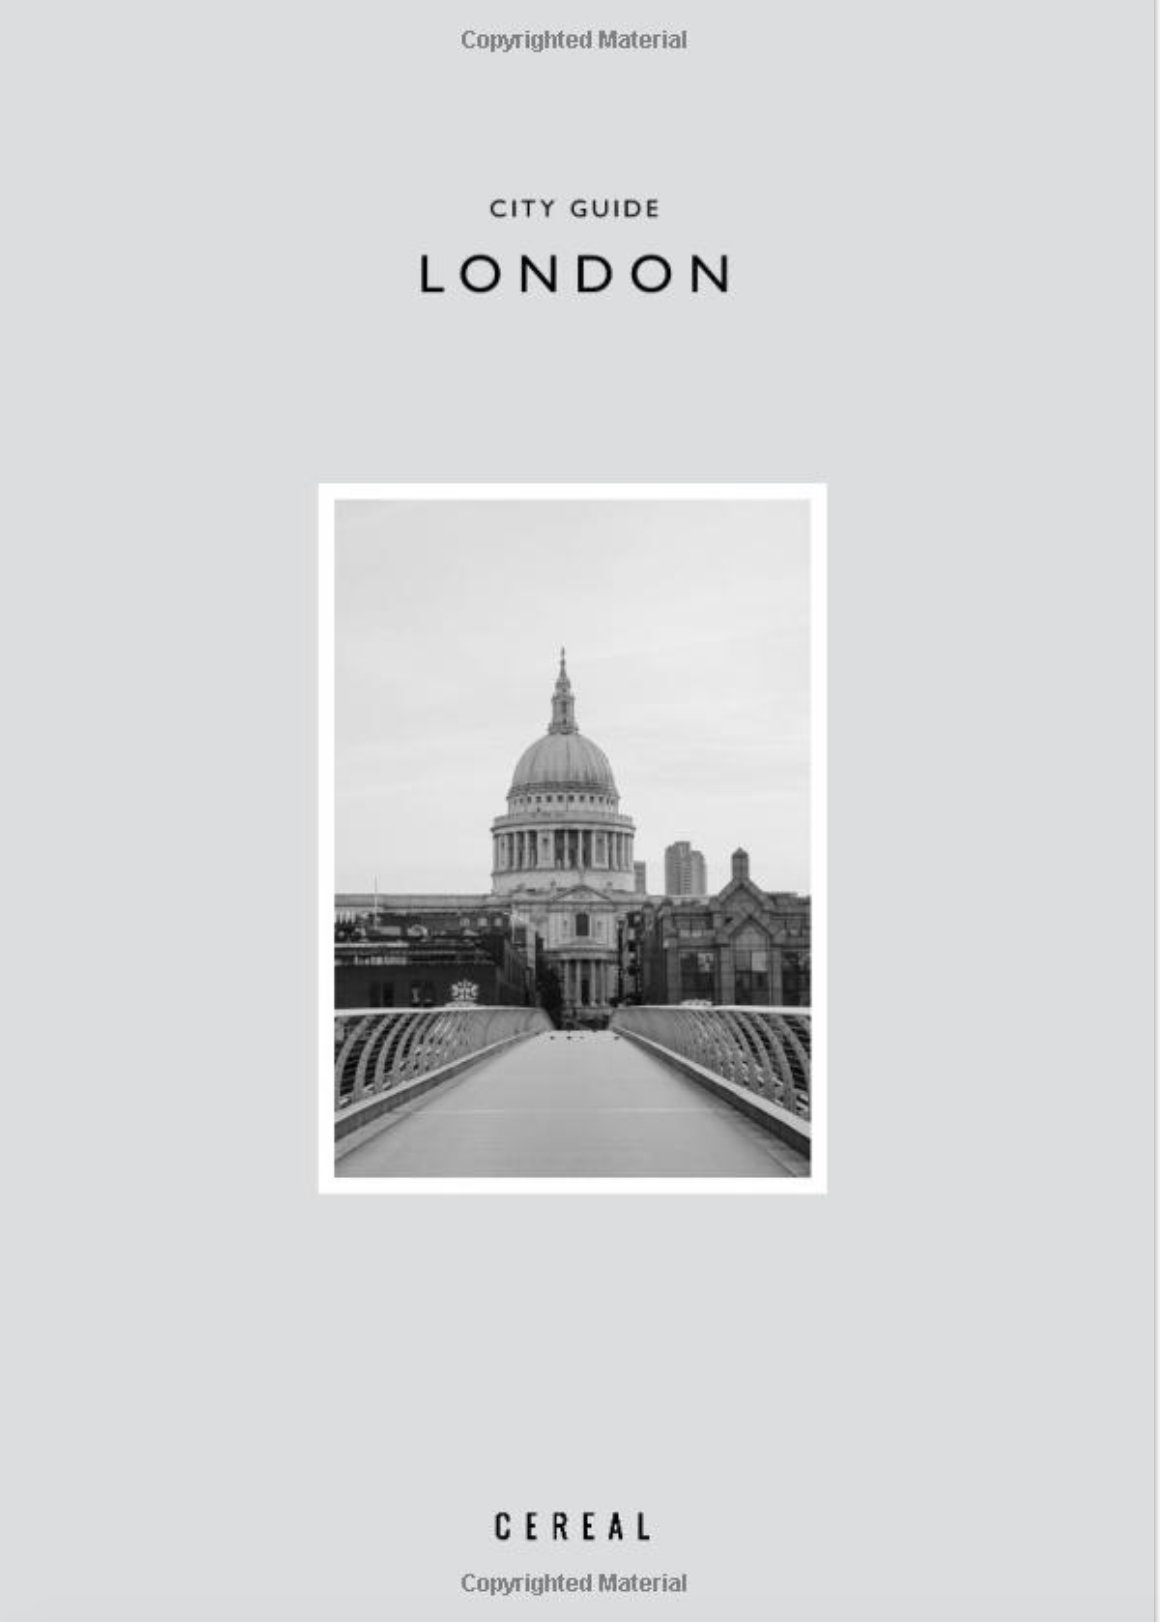 City Guide: London by Cereal